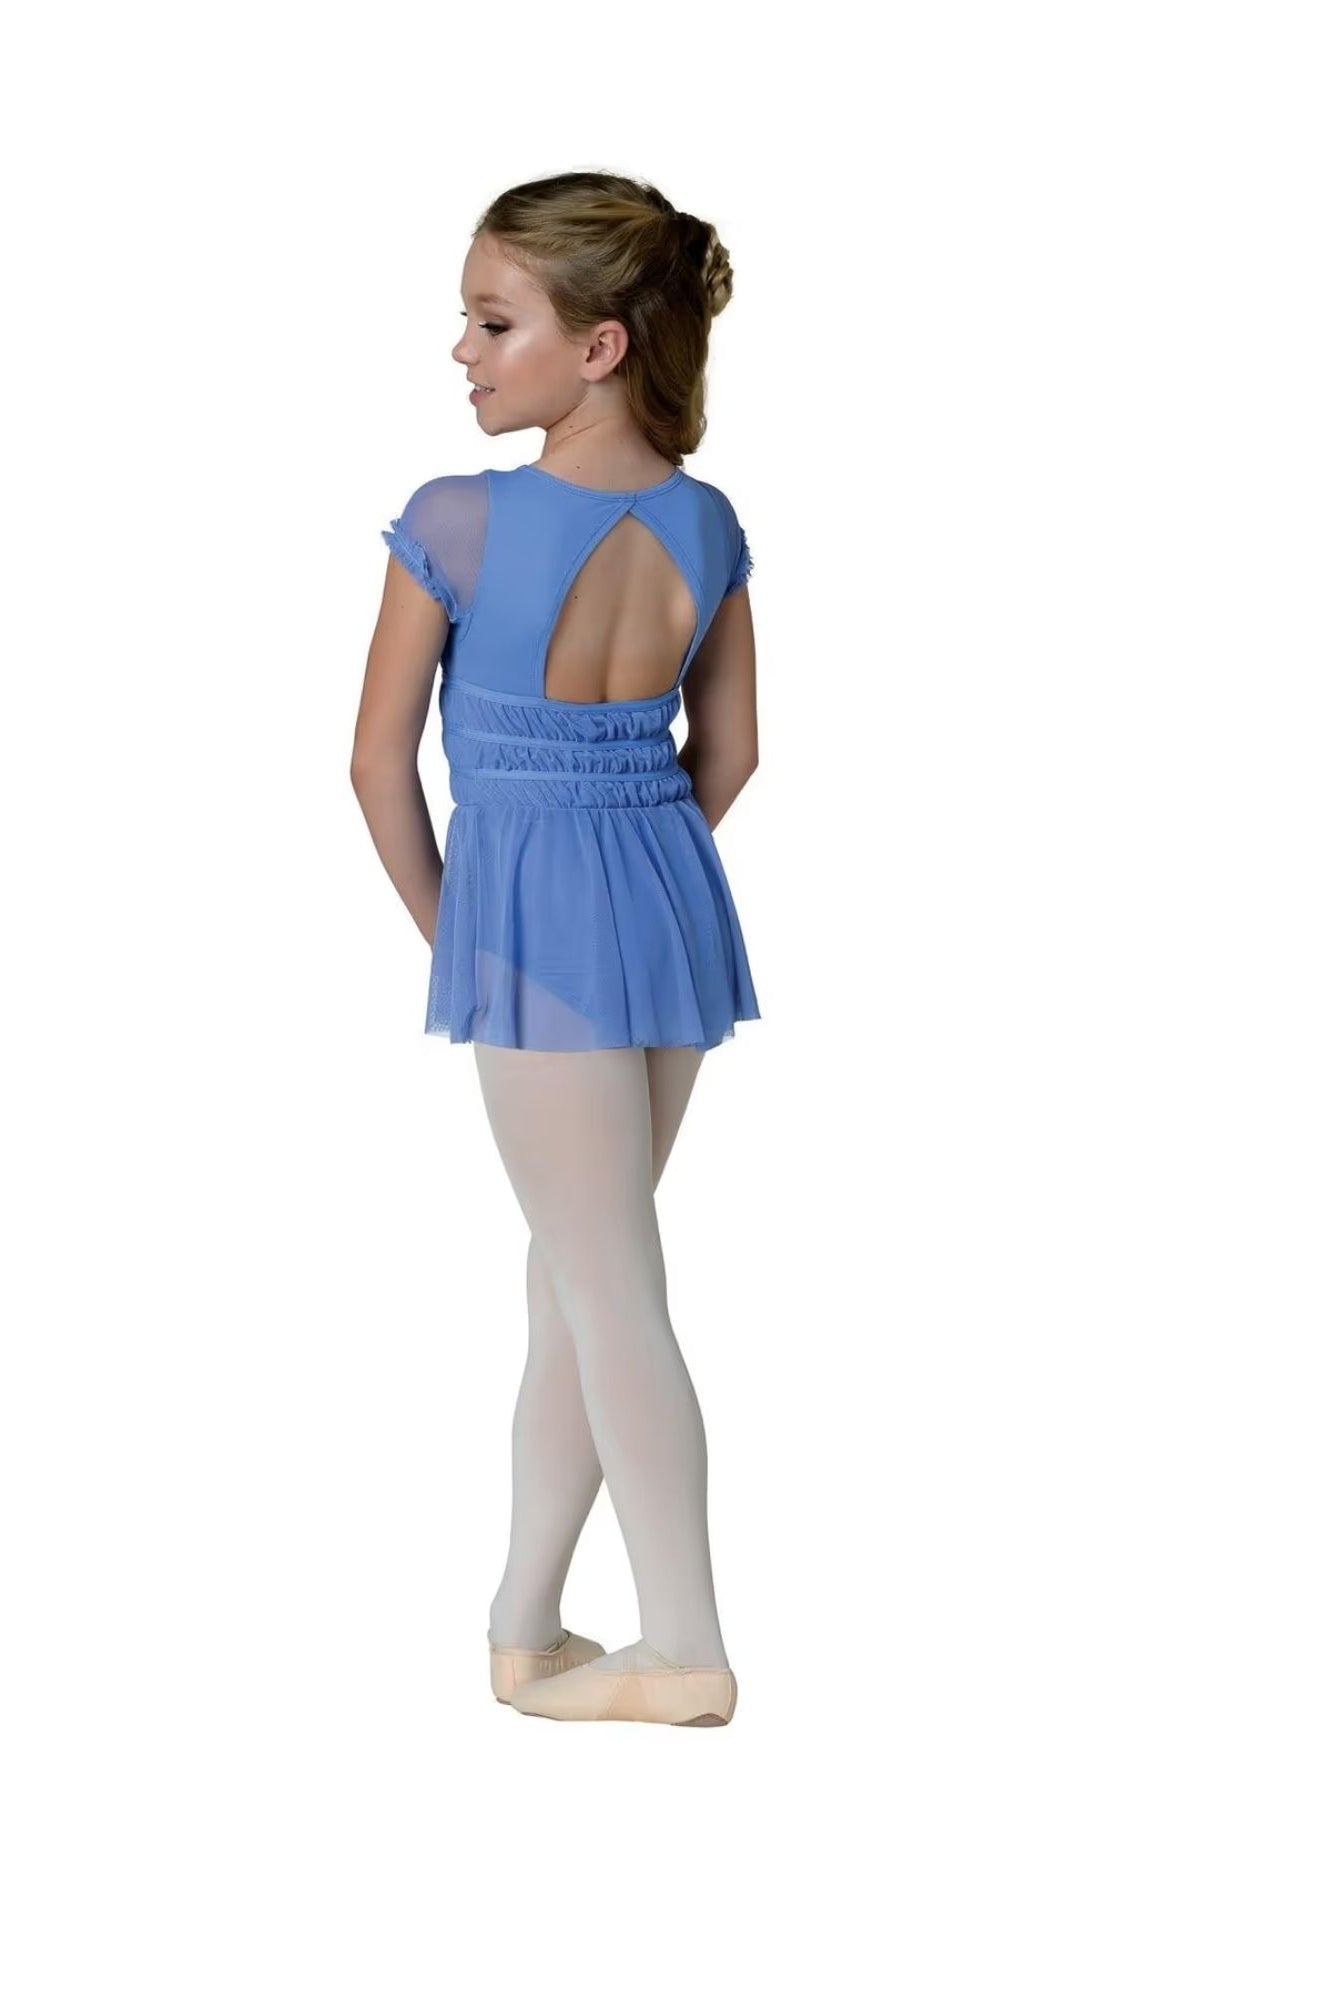 22204C Willow Ruffle Skirted Leotard w/sheer Overlay Periwinkle Back